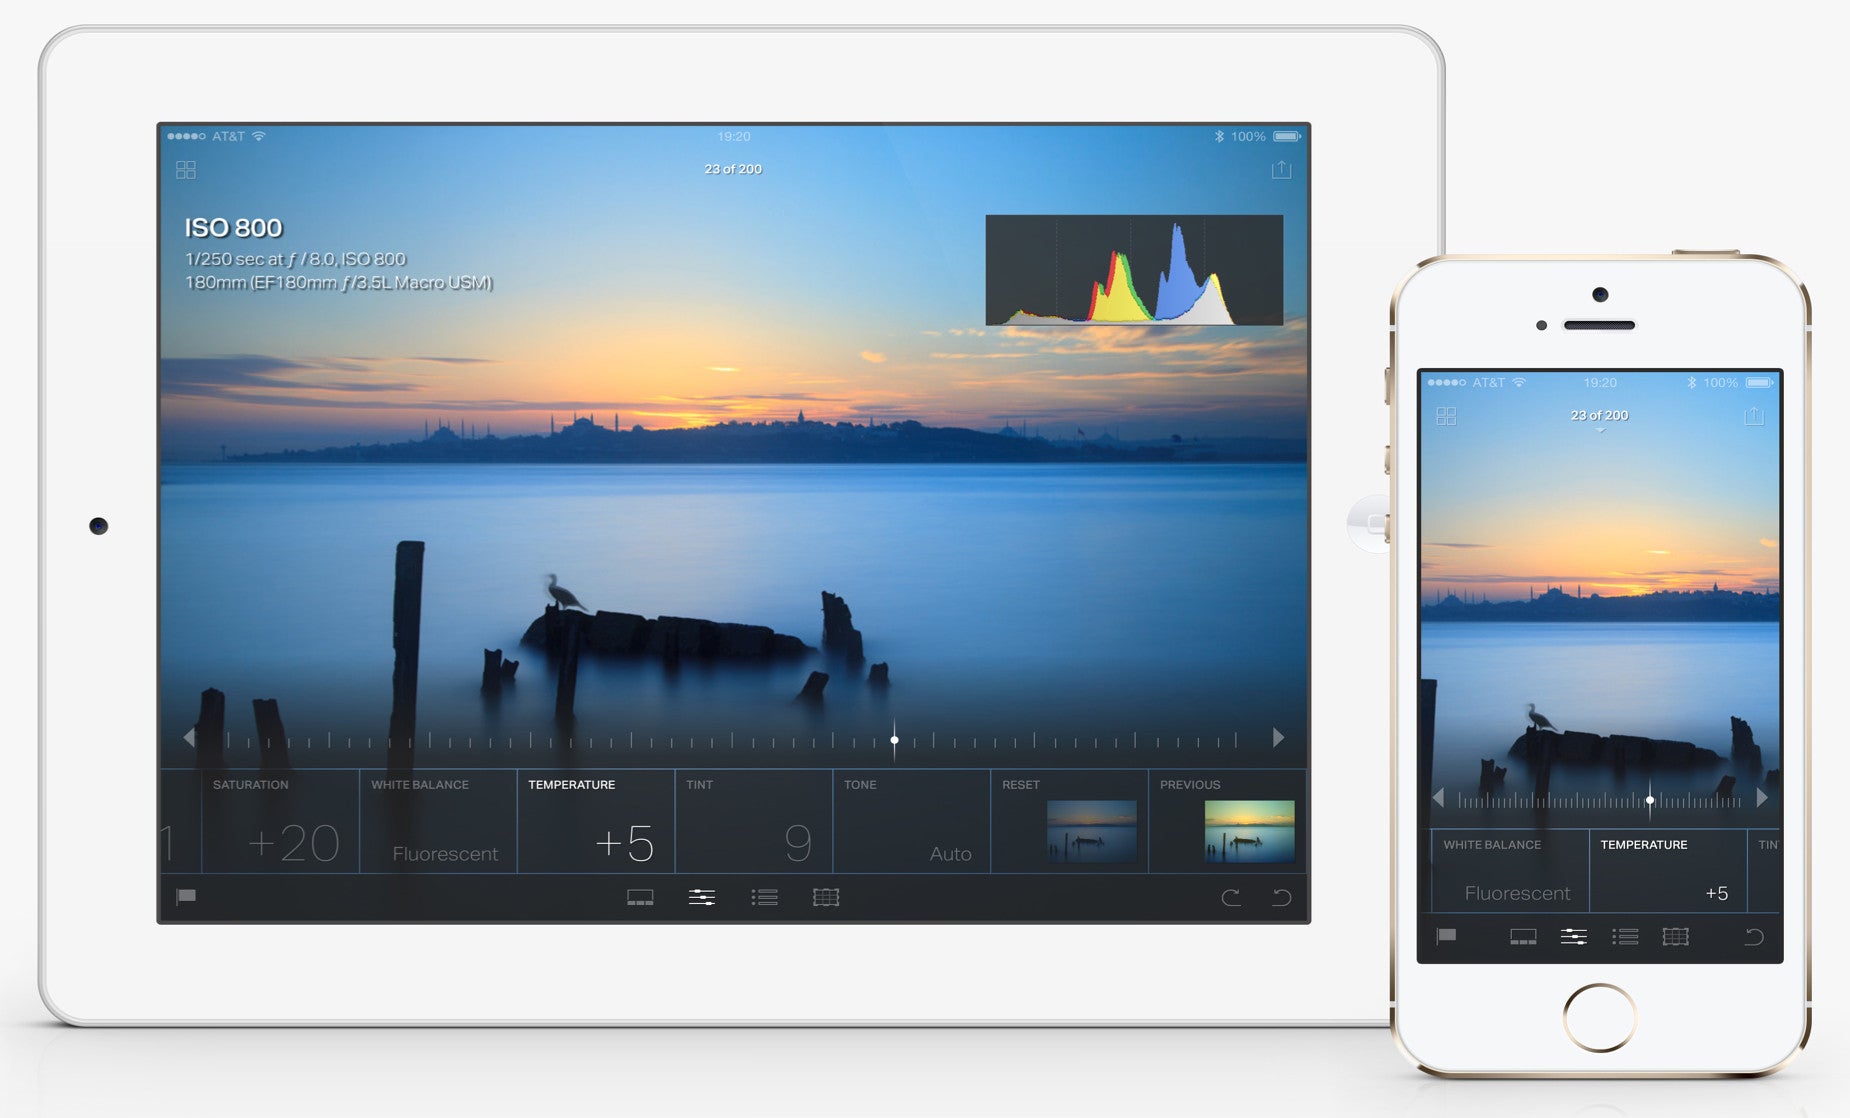 Adobe releases Lightroom 2.6 for iOS featuring new edit interface and info section